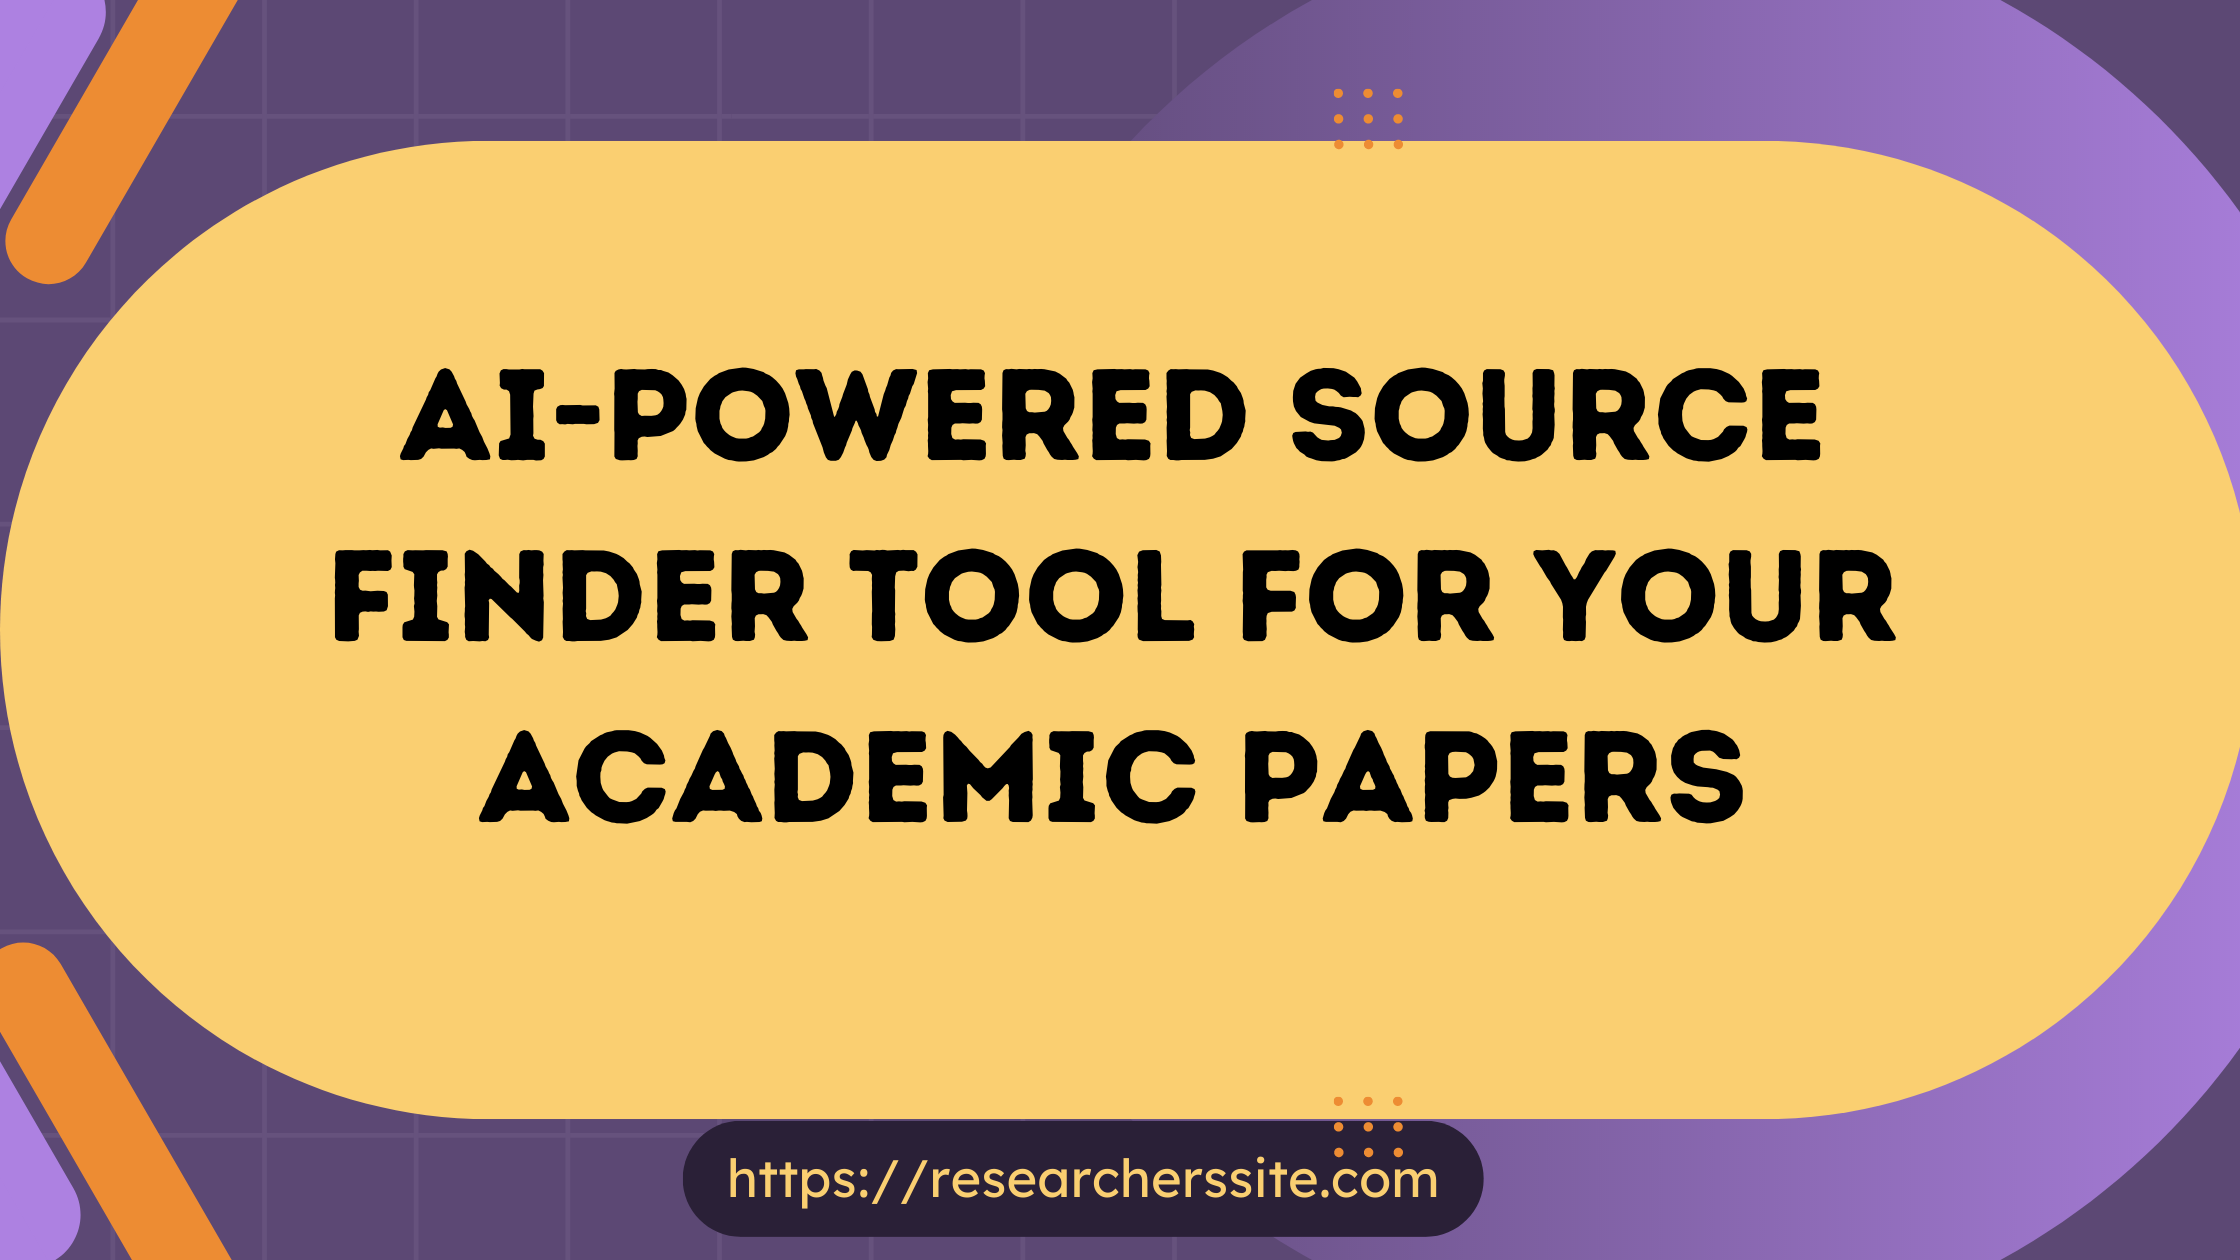 AI-Powered Source Finder Tool for Your Academic Papers